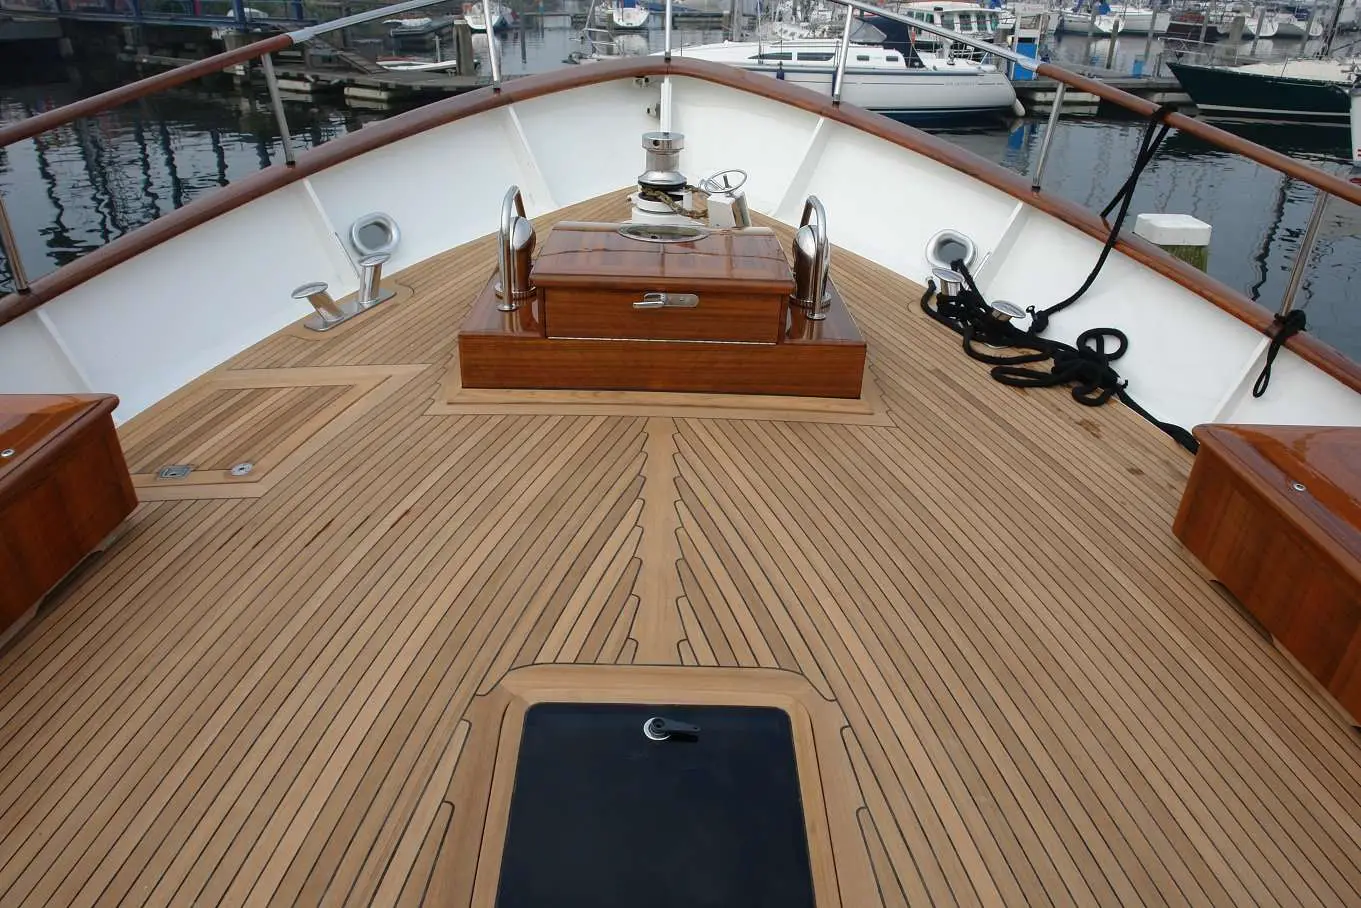 Why Use Rubber Mats on Boat Decks? â Rubber Flooring Blog